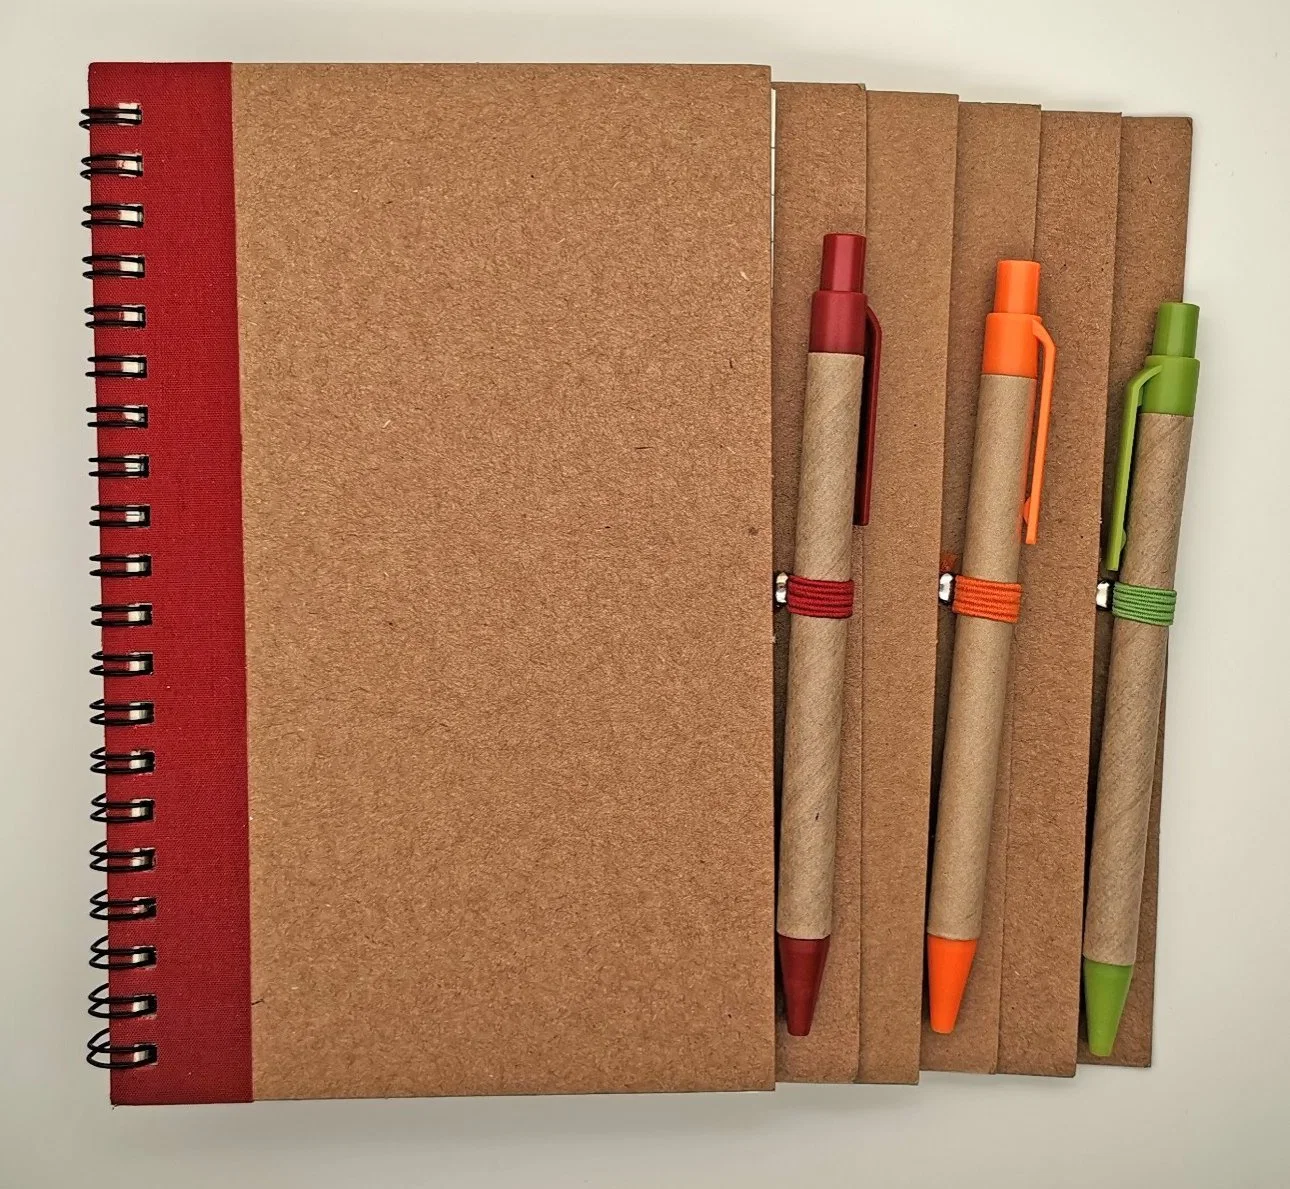 New Design Customized Spiral Notebook with Craft Paper Pen